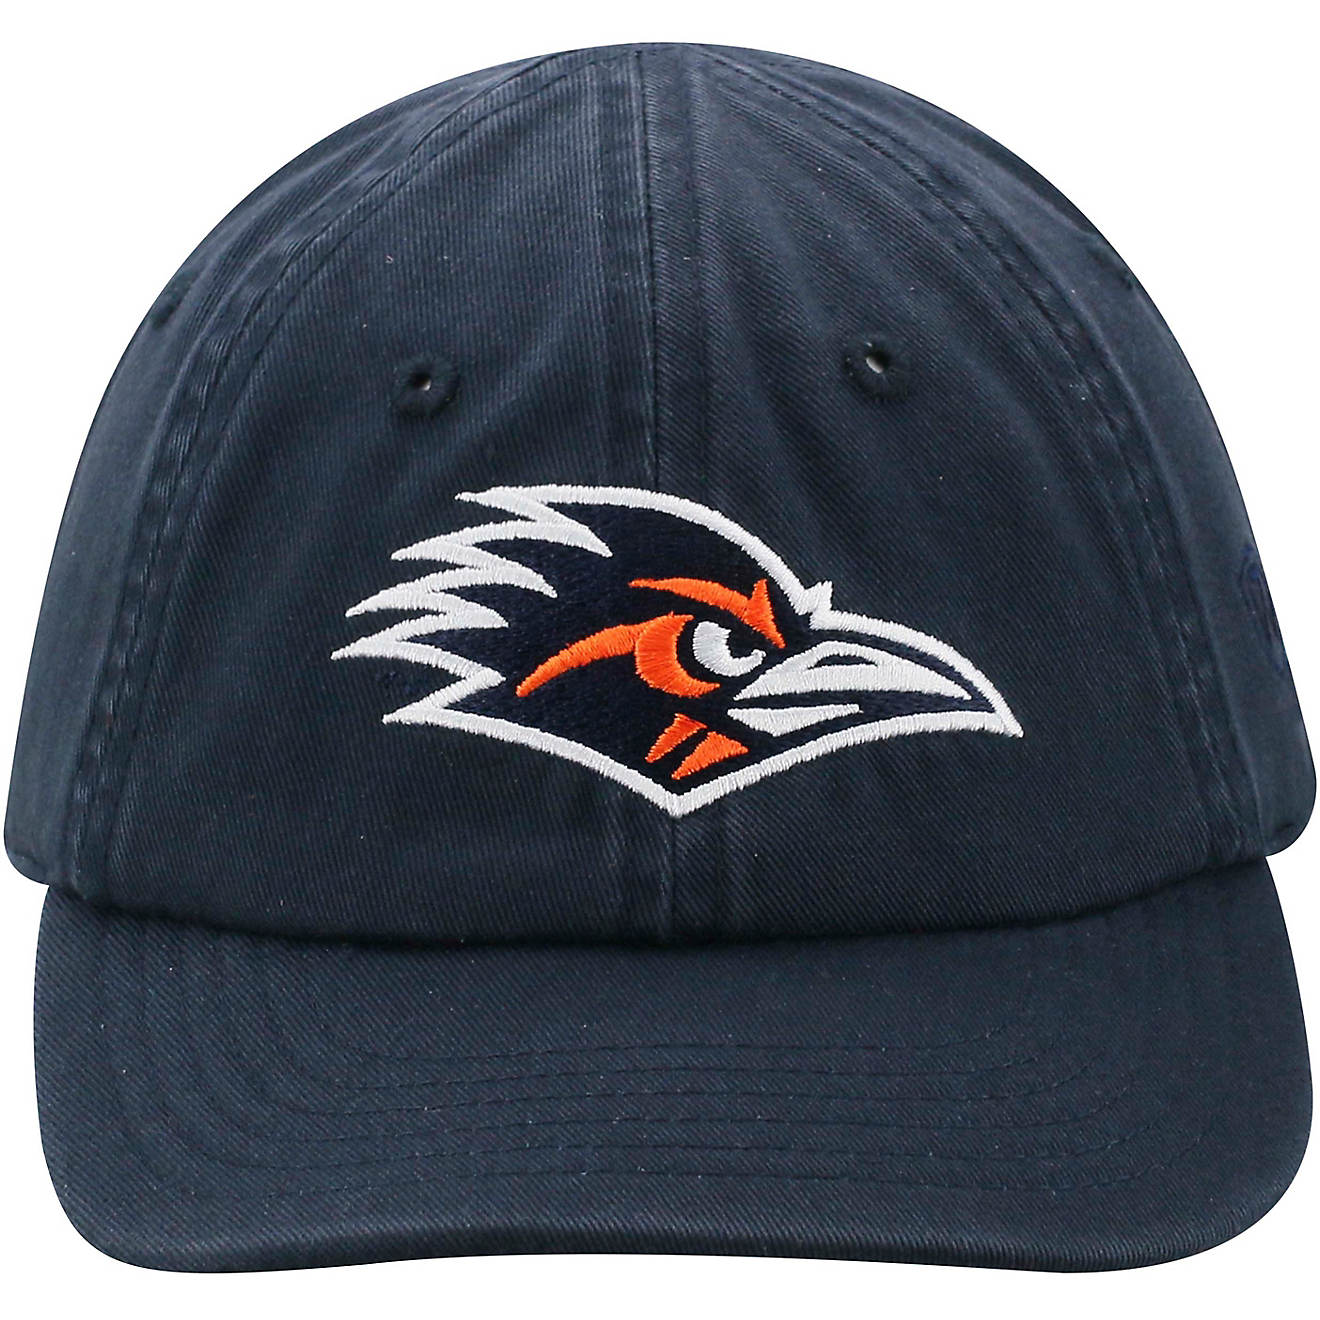 Top of the World Infants' University of Texas at San Antonio Mini Me Adjustable Cap                                              - view number 1